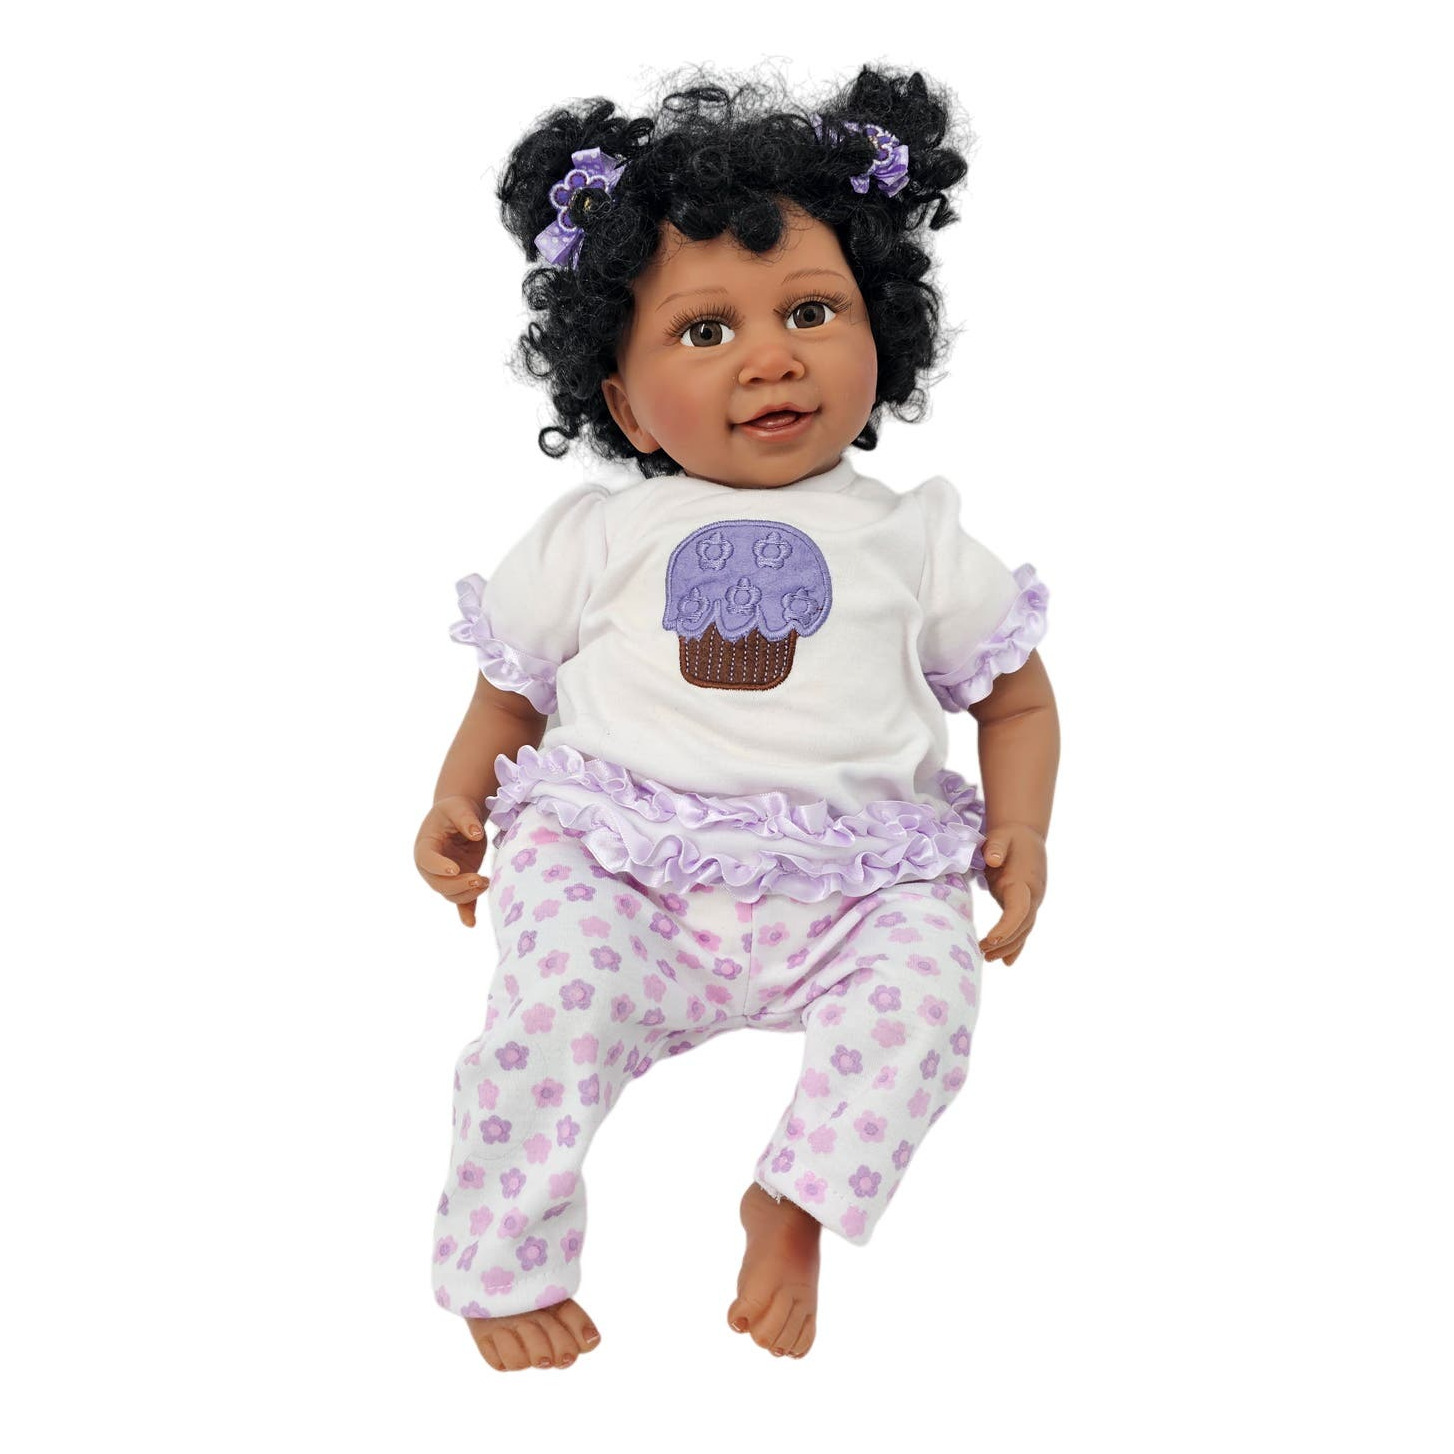 Artist Made Realistic Reborn Baby Toddler Doll African American Girl Signed